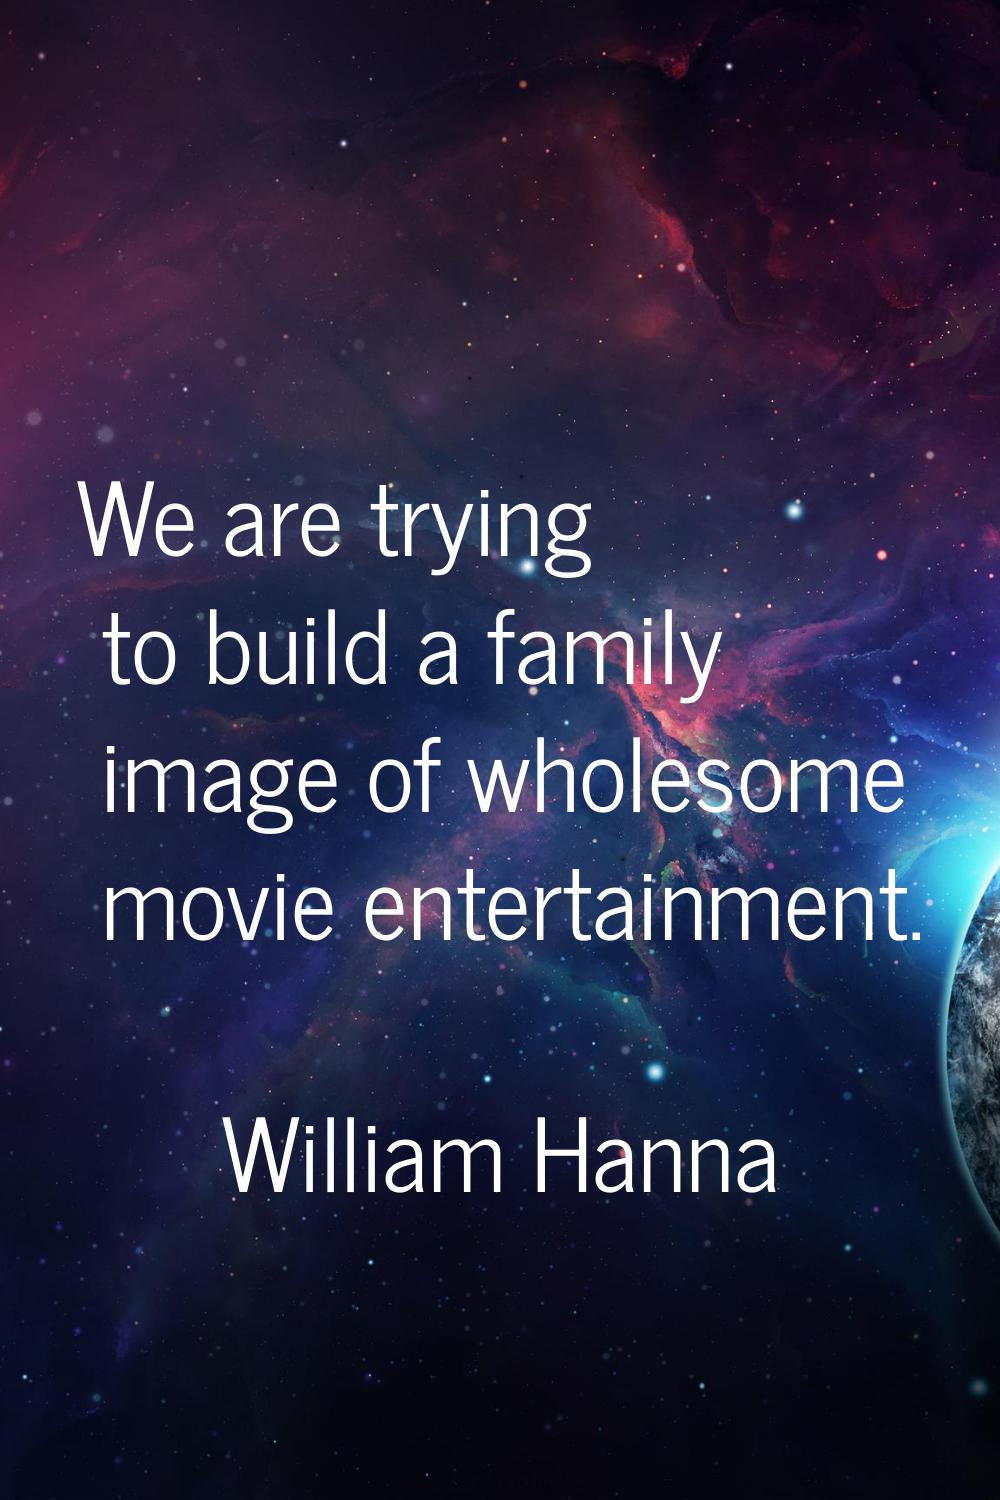 We are trying to build a family image of wholesome movie entertainment.